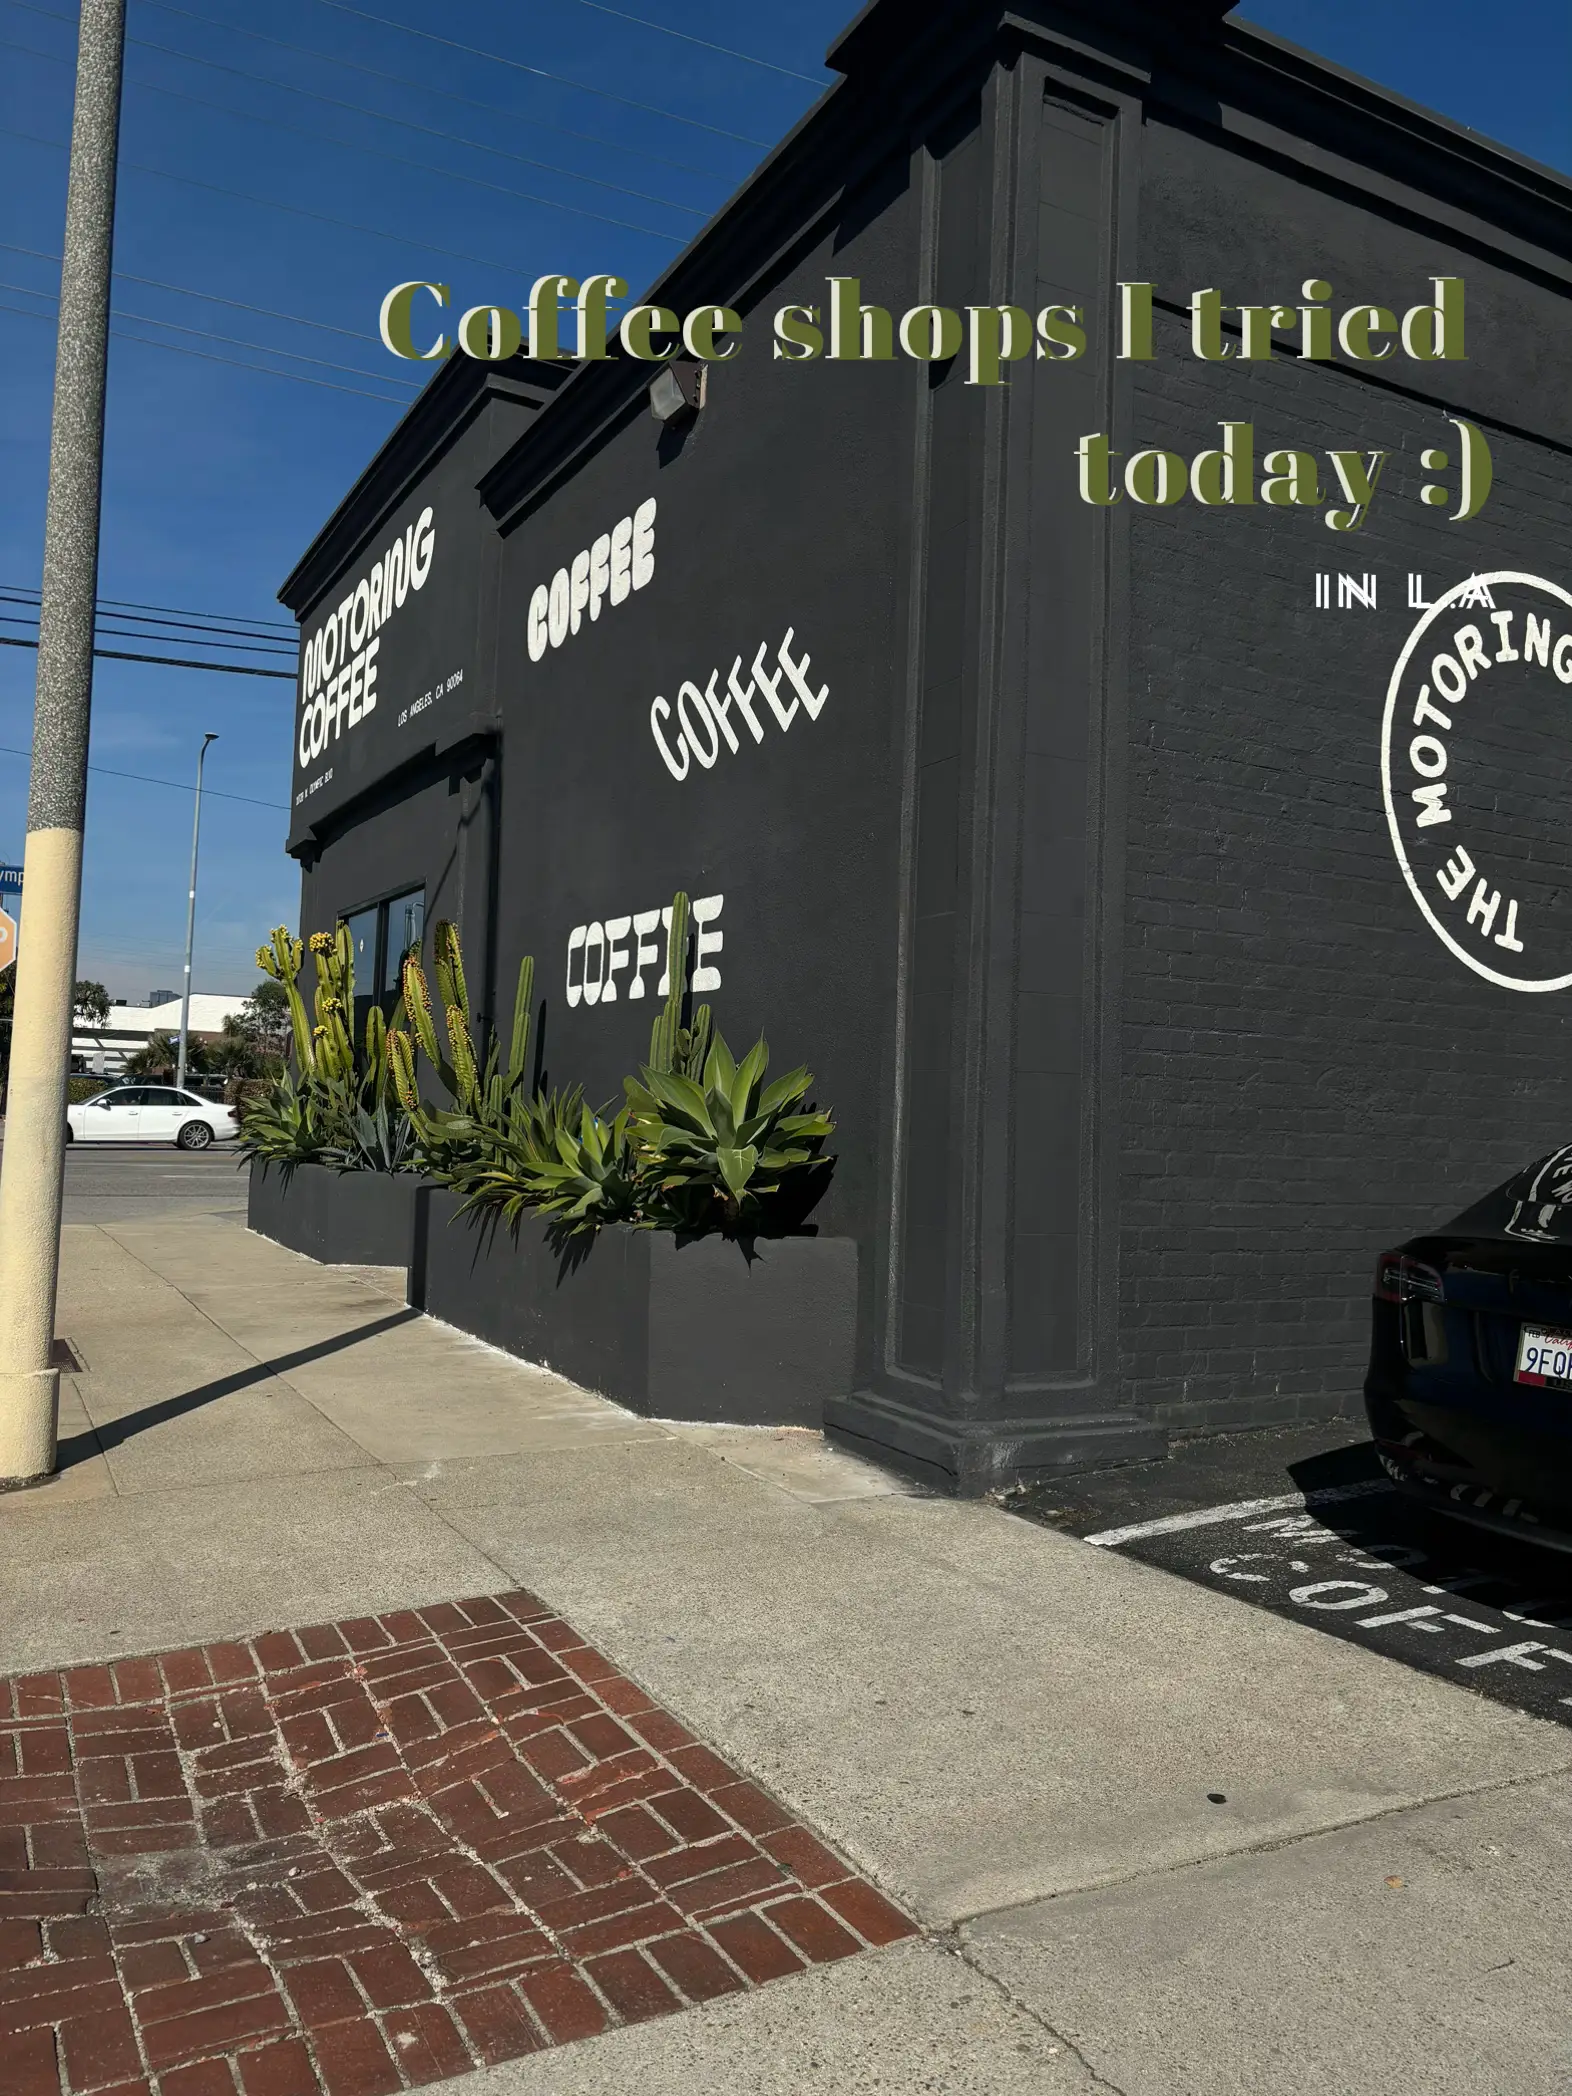  A black and white photo of a coffee shop with a car parked in front.